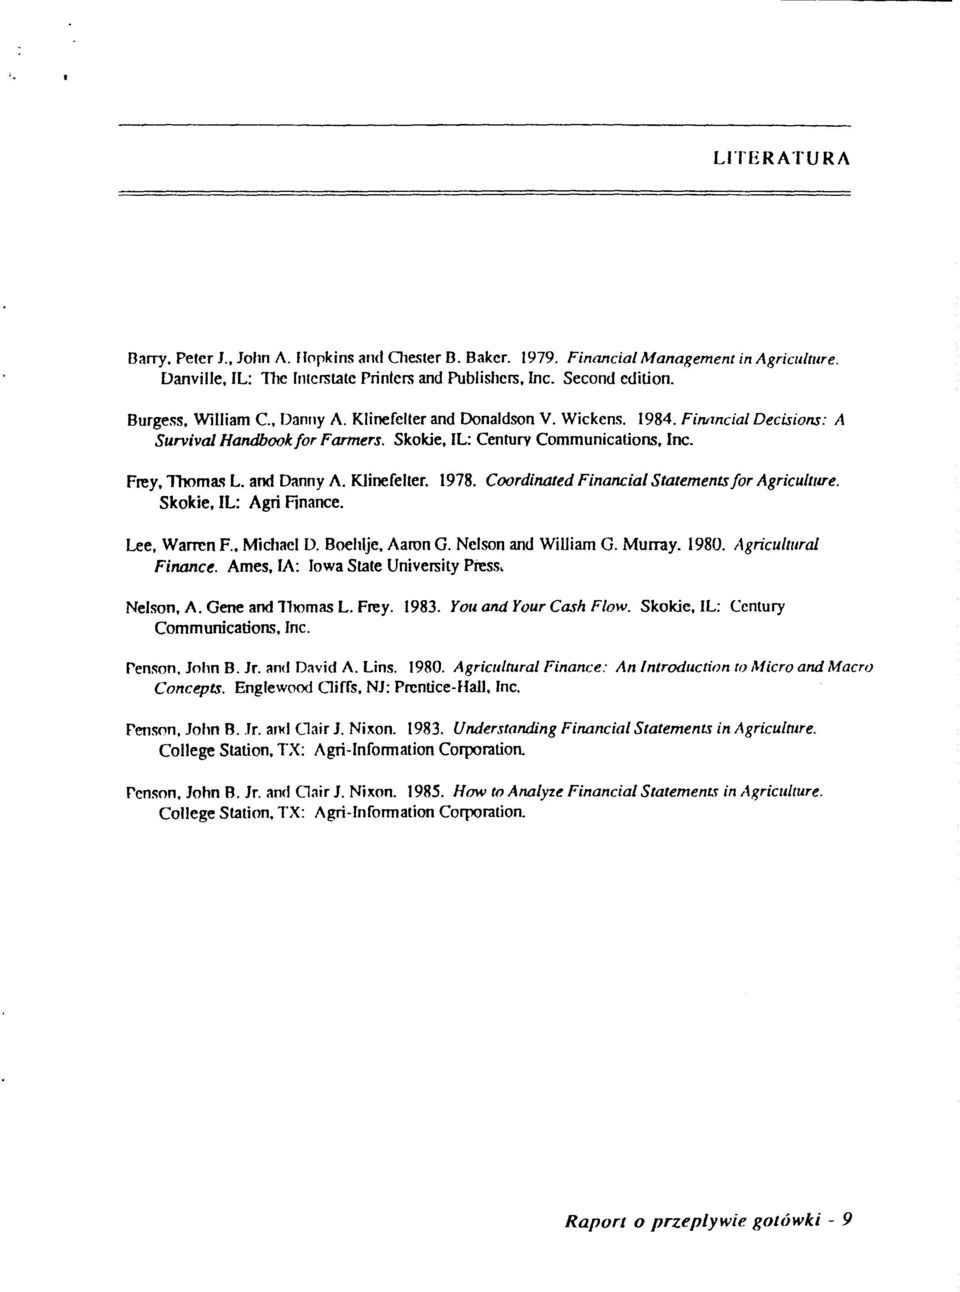 Klinefelter. 1978. Coordinated Financial Statements for Agriculture. Skokie, IL: Agri Finance. Lee, Warren F. Michael D. Boehlje, Aaron G. Nelson and WiUiam G. Murray. 1980. Agricultural Finance.